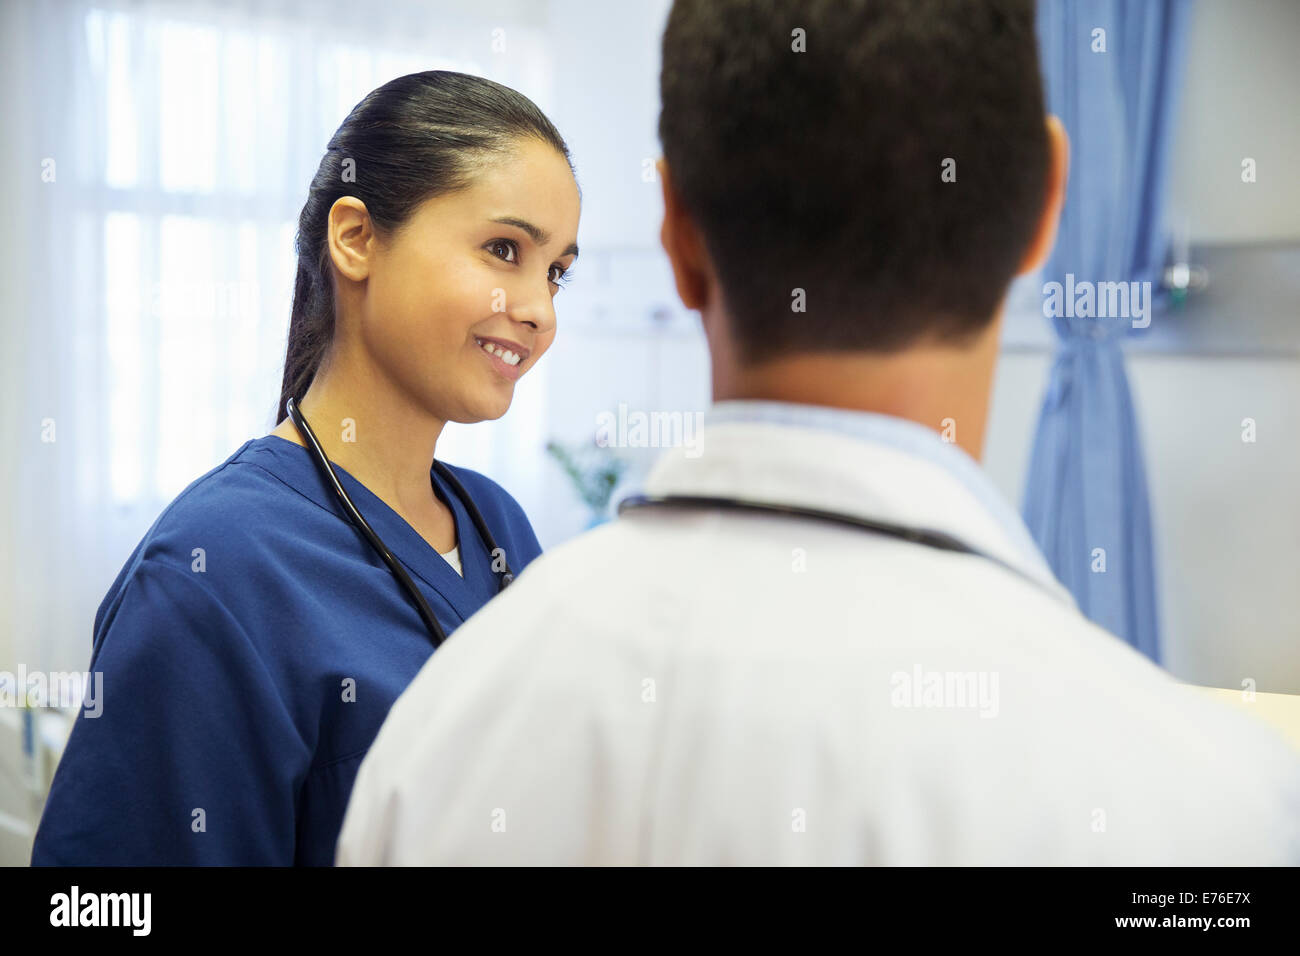 Doctor and nurse talking in hospital room Stock Photo